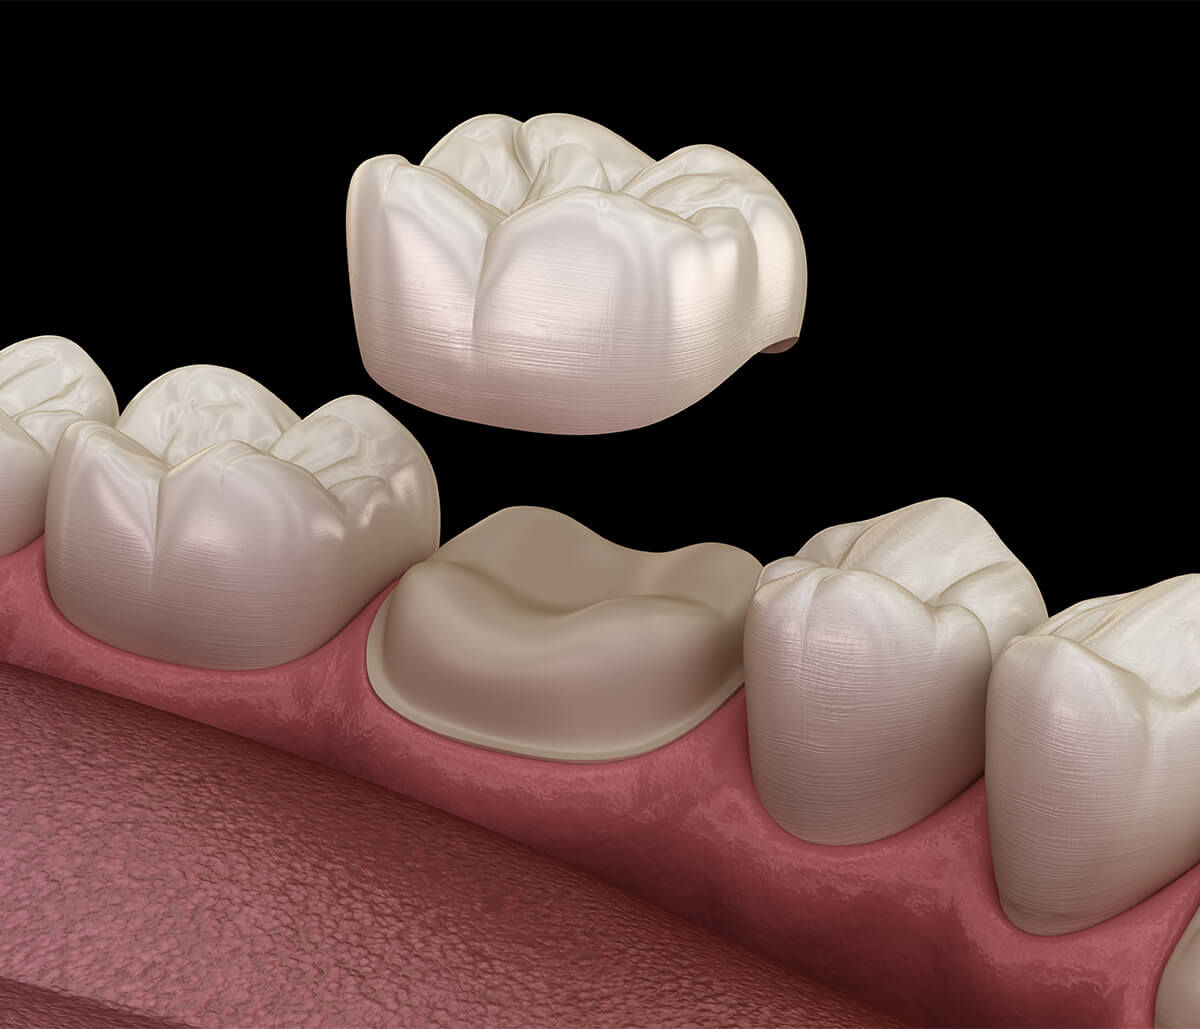 Same Day Dental Crowns Benefits in Aliso Viejo CA Area